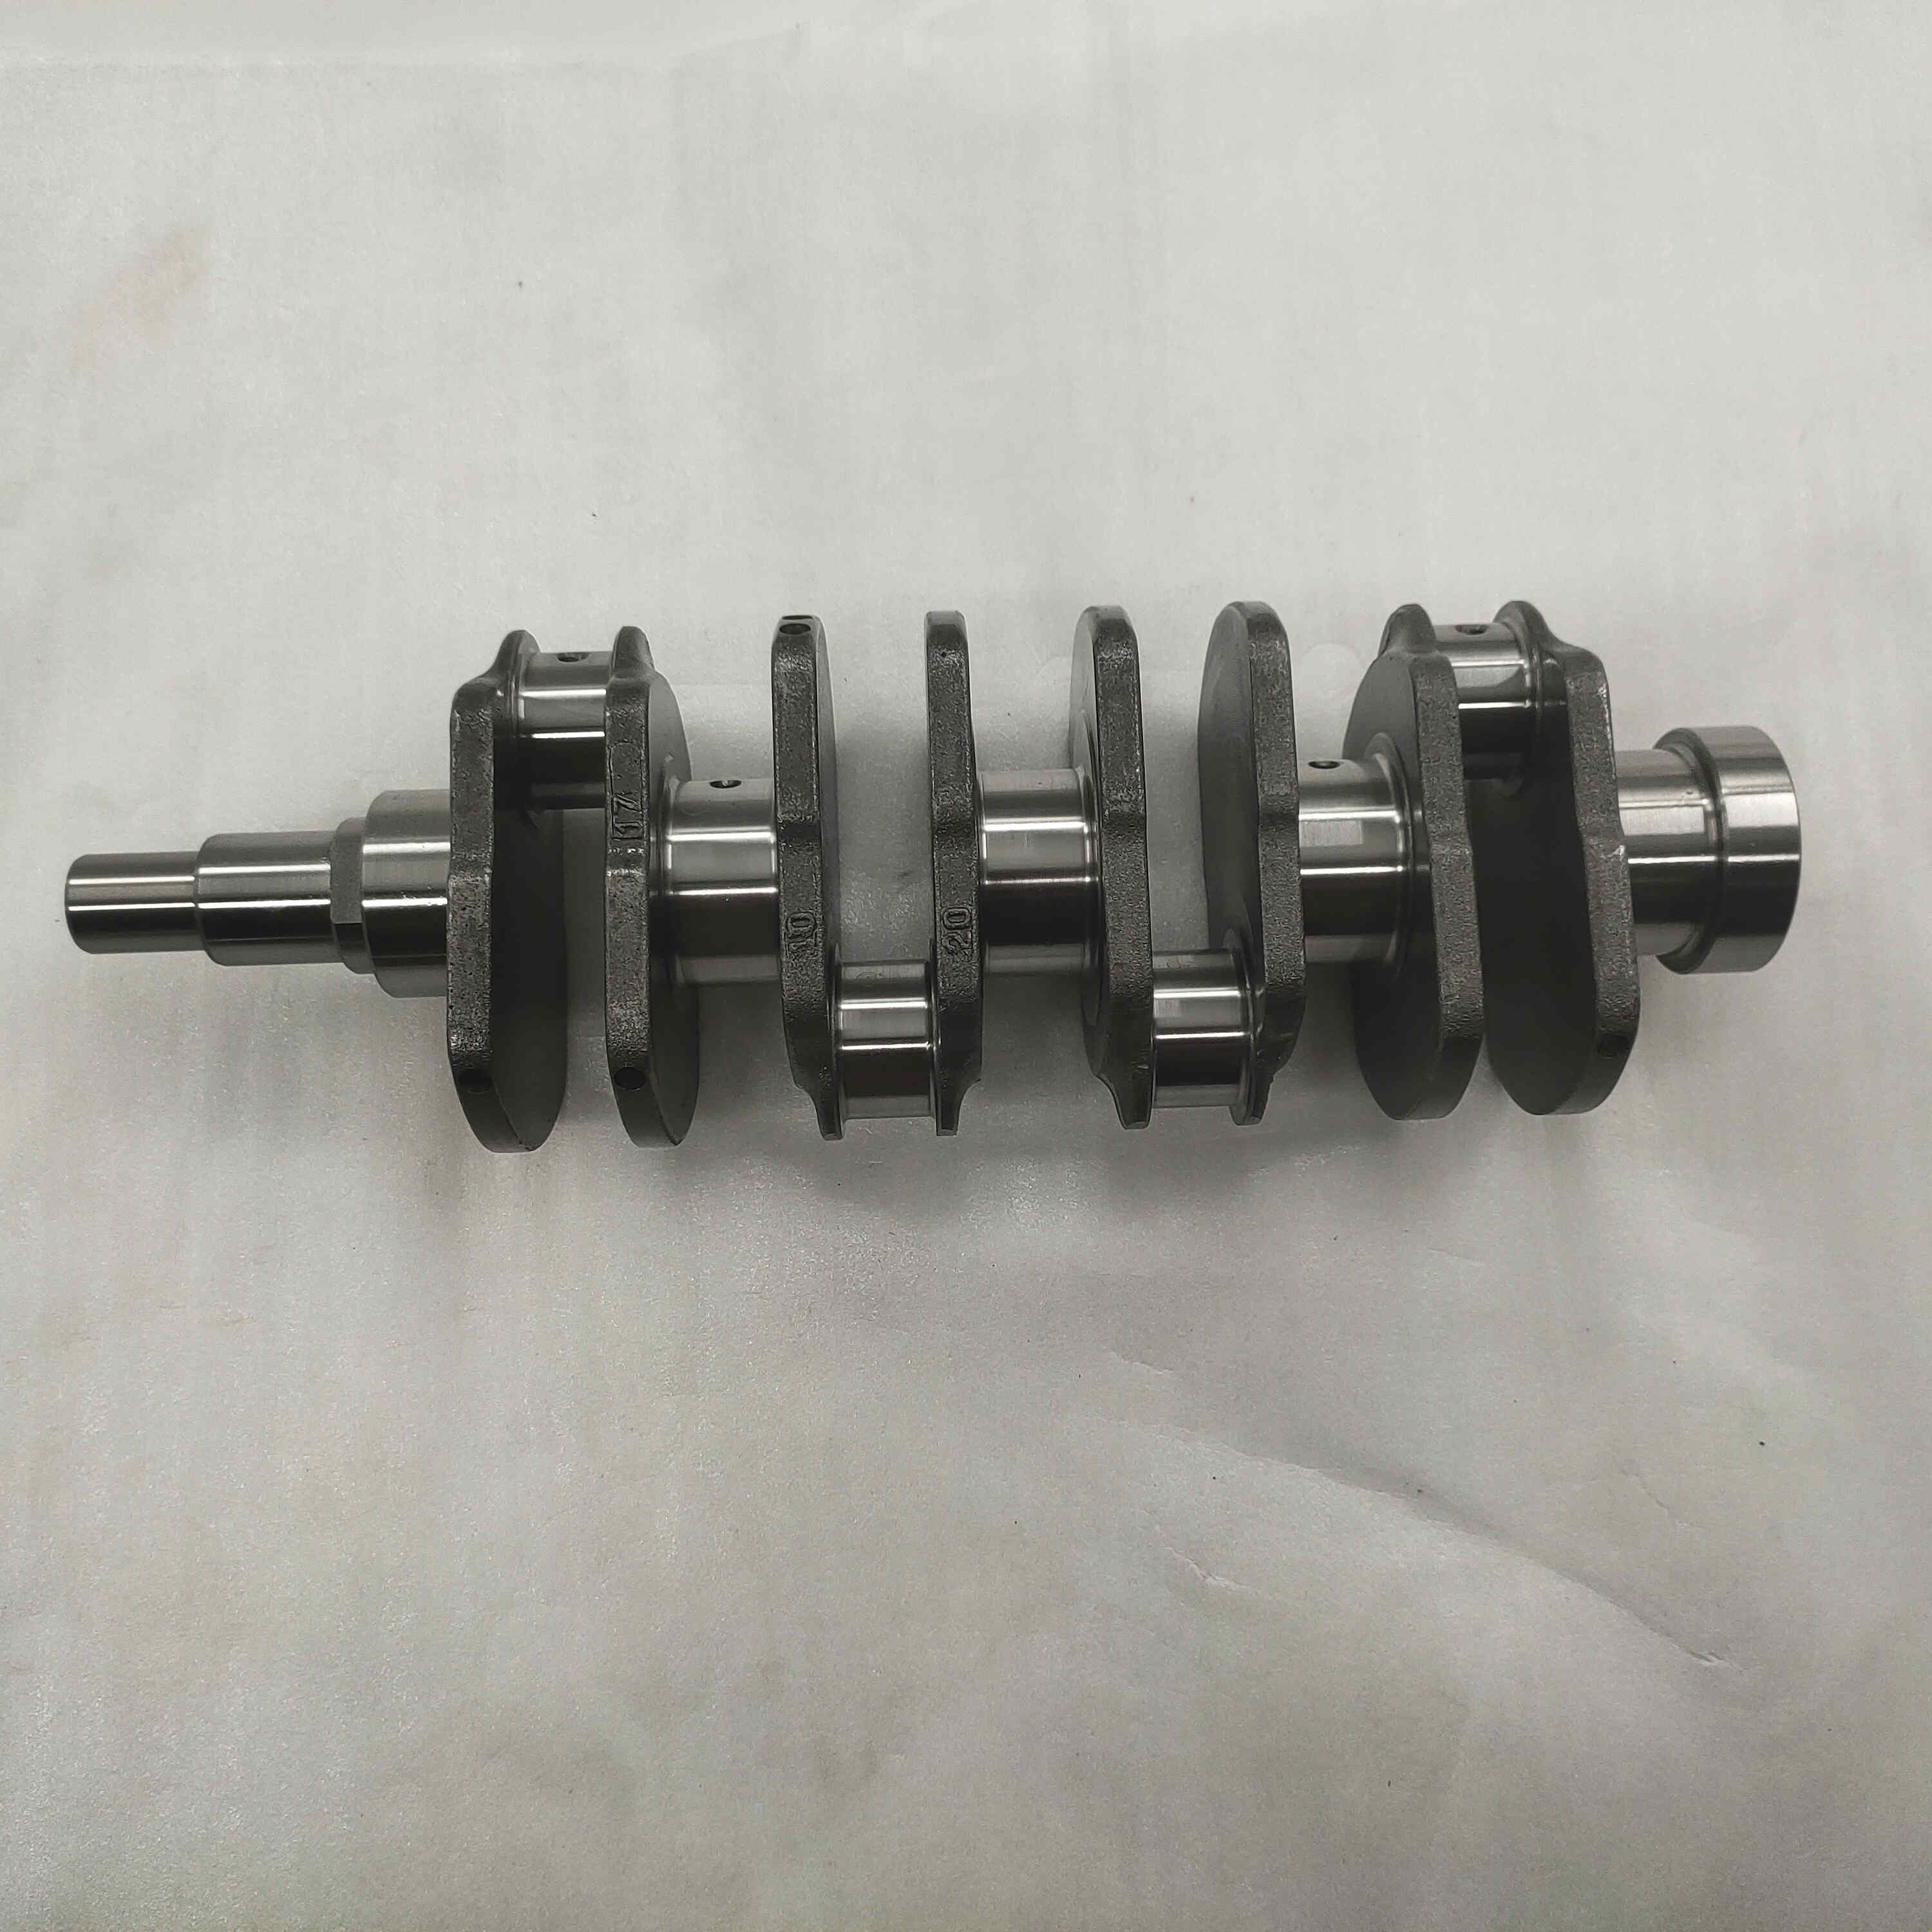 DAYANG Assembly Crankshaft motorcycle automobile parts Motorcycle Engine tricycle 800cc water-cooled engine crankshaft